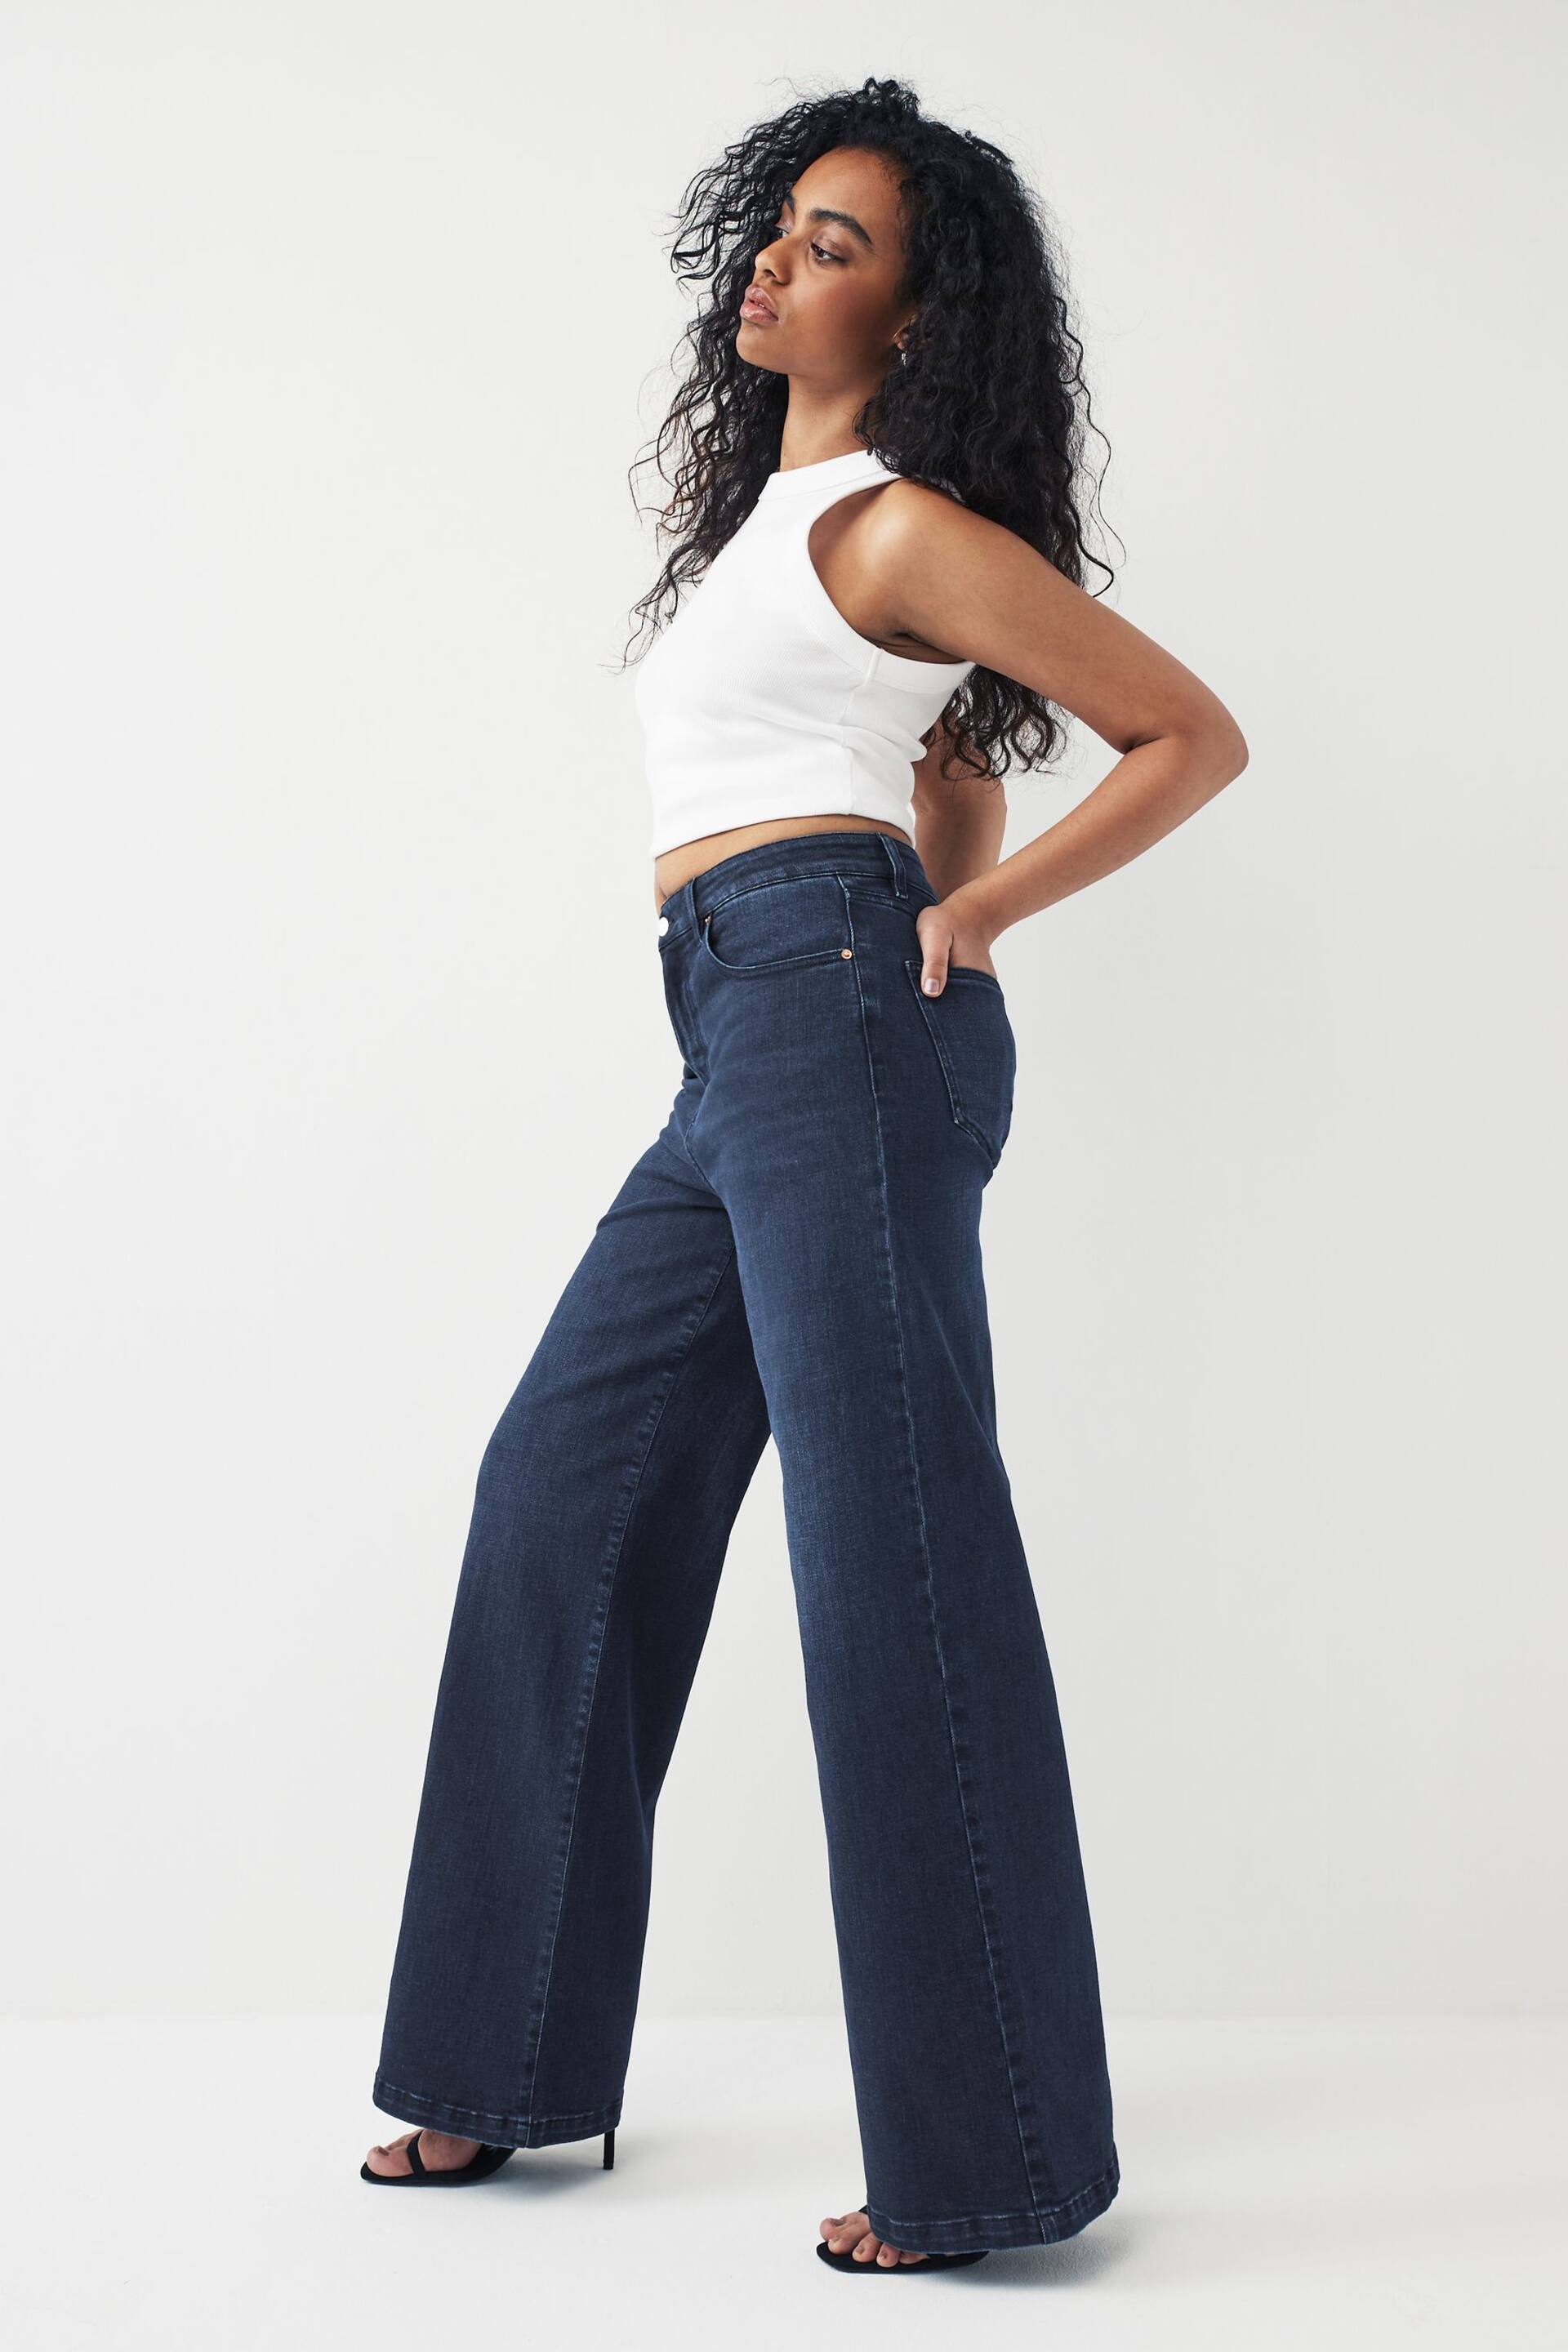 Inky Blue Hourglass Wide Leg Jeans - Image 4 of 7